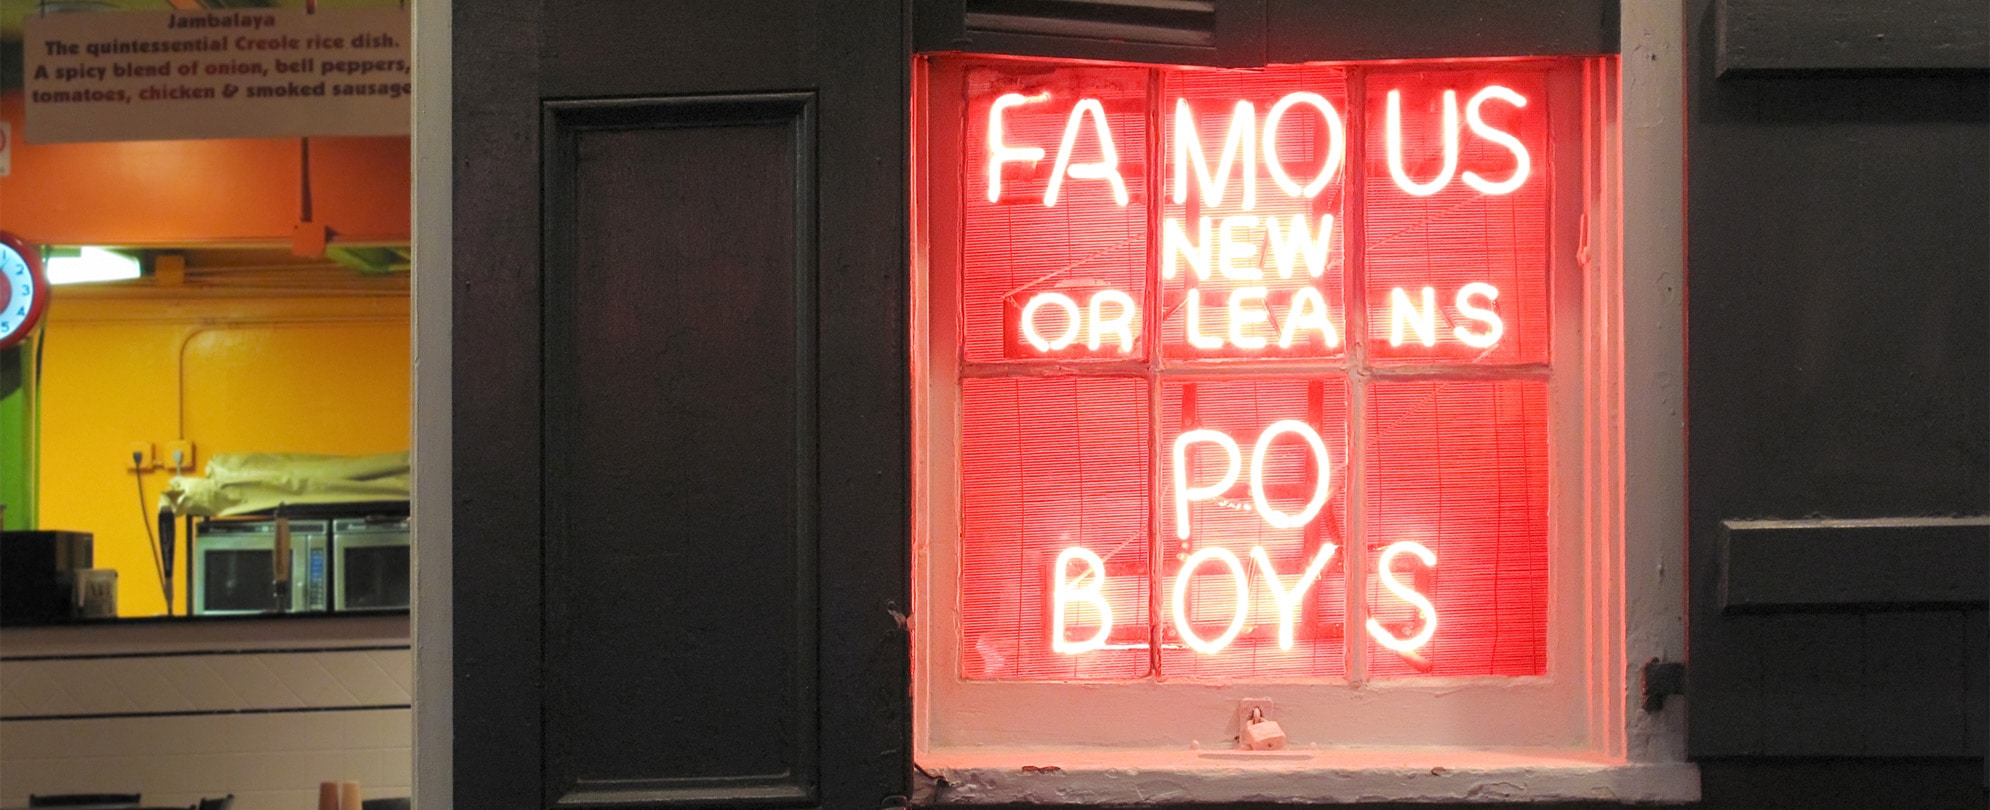 A neon sign that reads "famous New Orleans Po Boys."